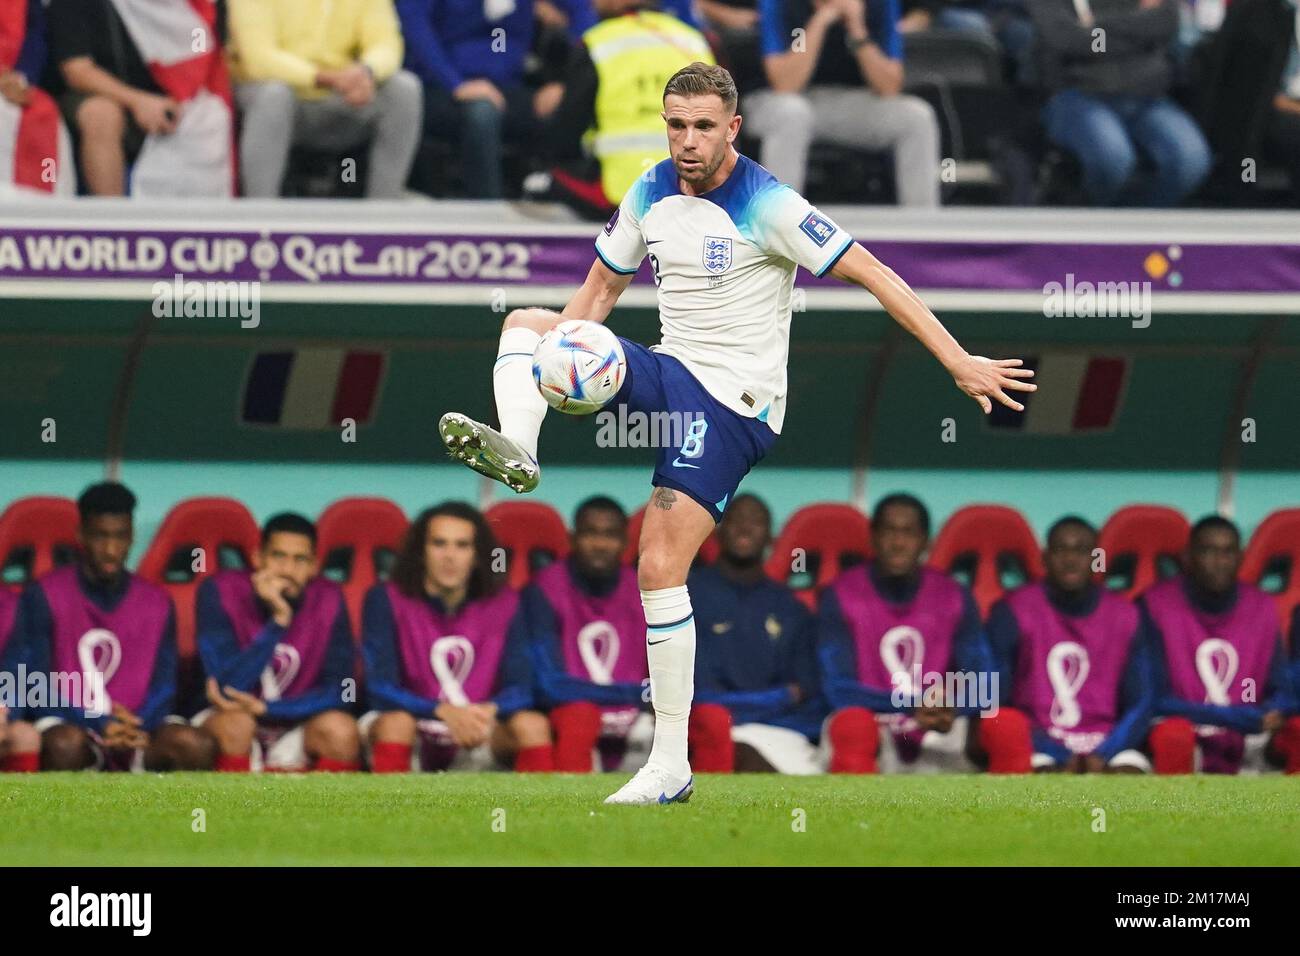 Al Khor, Qatar. 10th Dec, 2022. AL KHOR, QATAR - DECEMBER 10: Jordan Henderson of England in action during the FIFA World Cup Qatar 2022 quarter final match between England and France at Al Bayt Stadium, on December 10, 2022 in Al Khor, Qatar.(Photo by Florencia Tan Jun/Pximages) Credit: Px Images/Alamy Live News Stock Photo